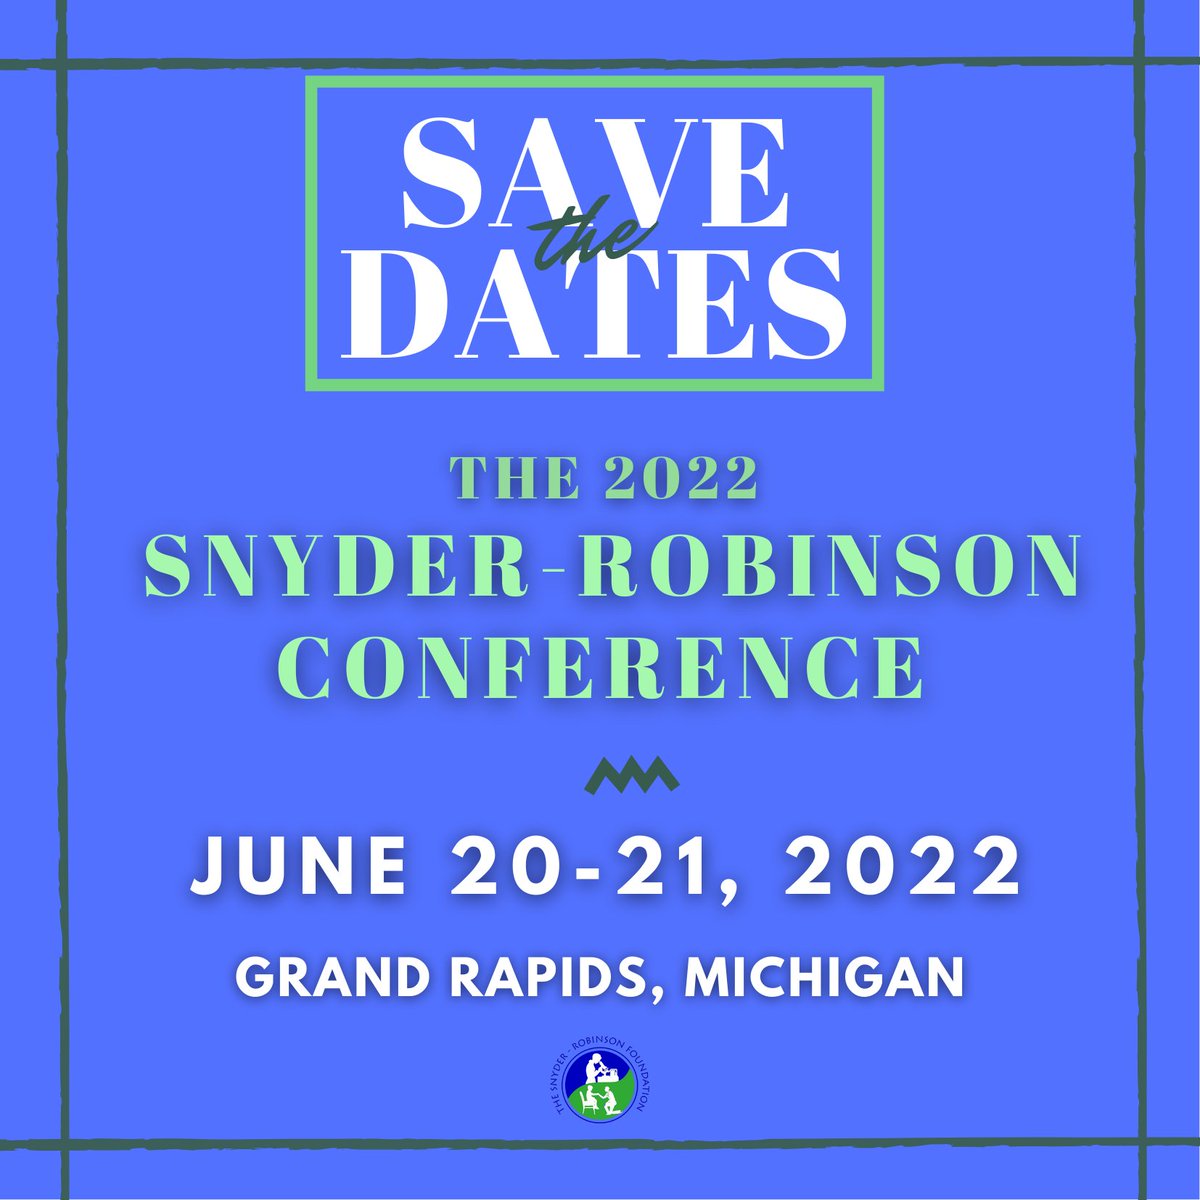 Save the dates: The Snyder-Robinson Foundation is hosting our 3rd annual SRS Conference on June 20-21, 2022 in Grand Rapids, Michigan. We'll see you there!